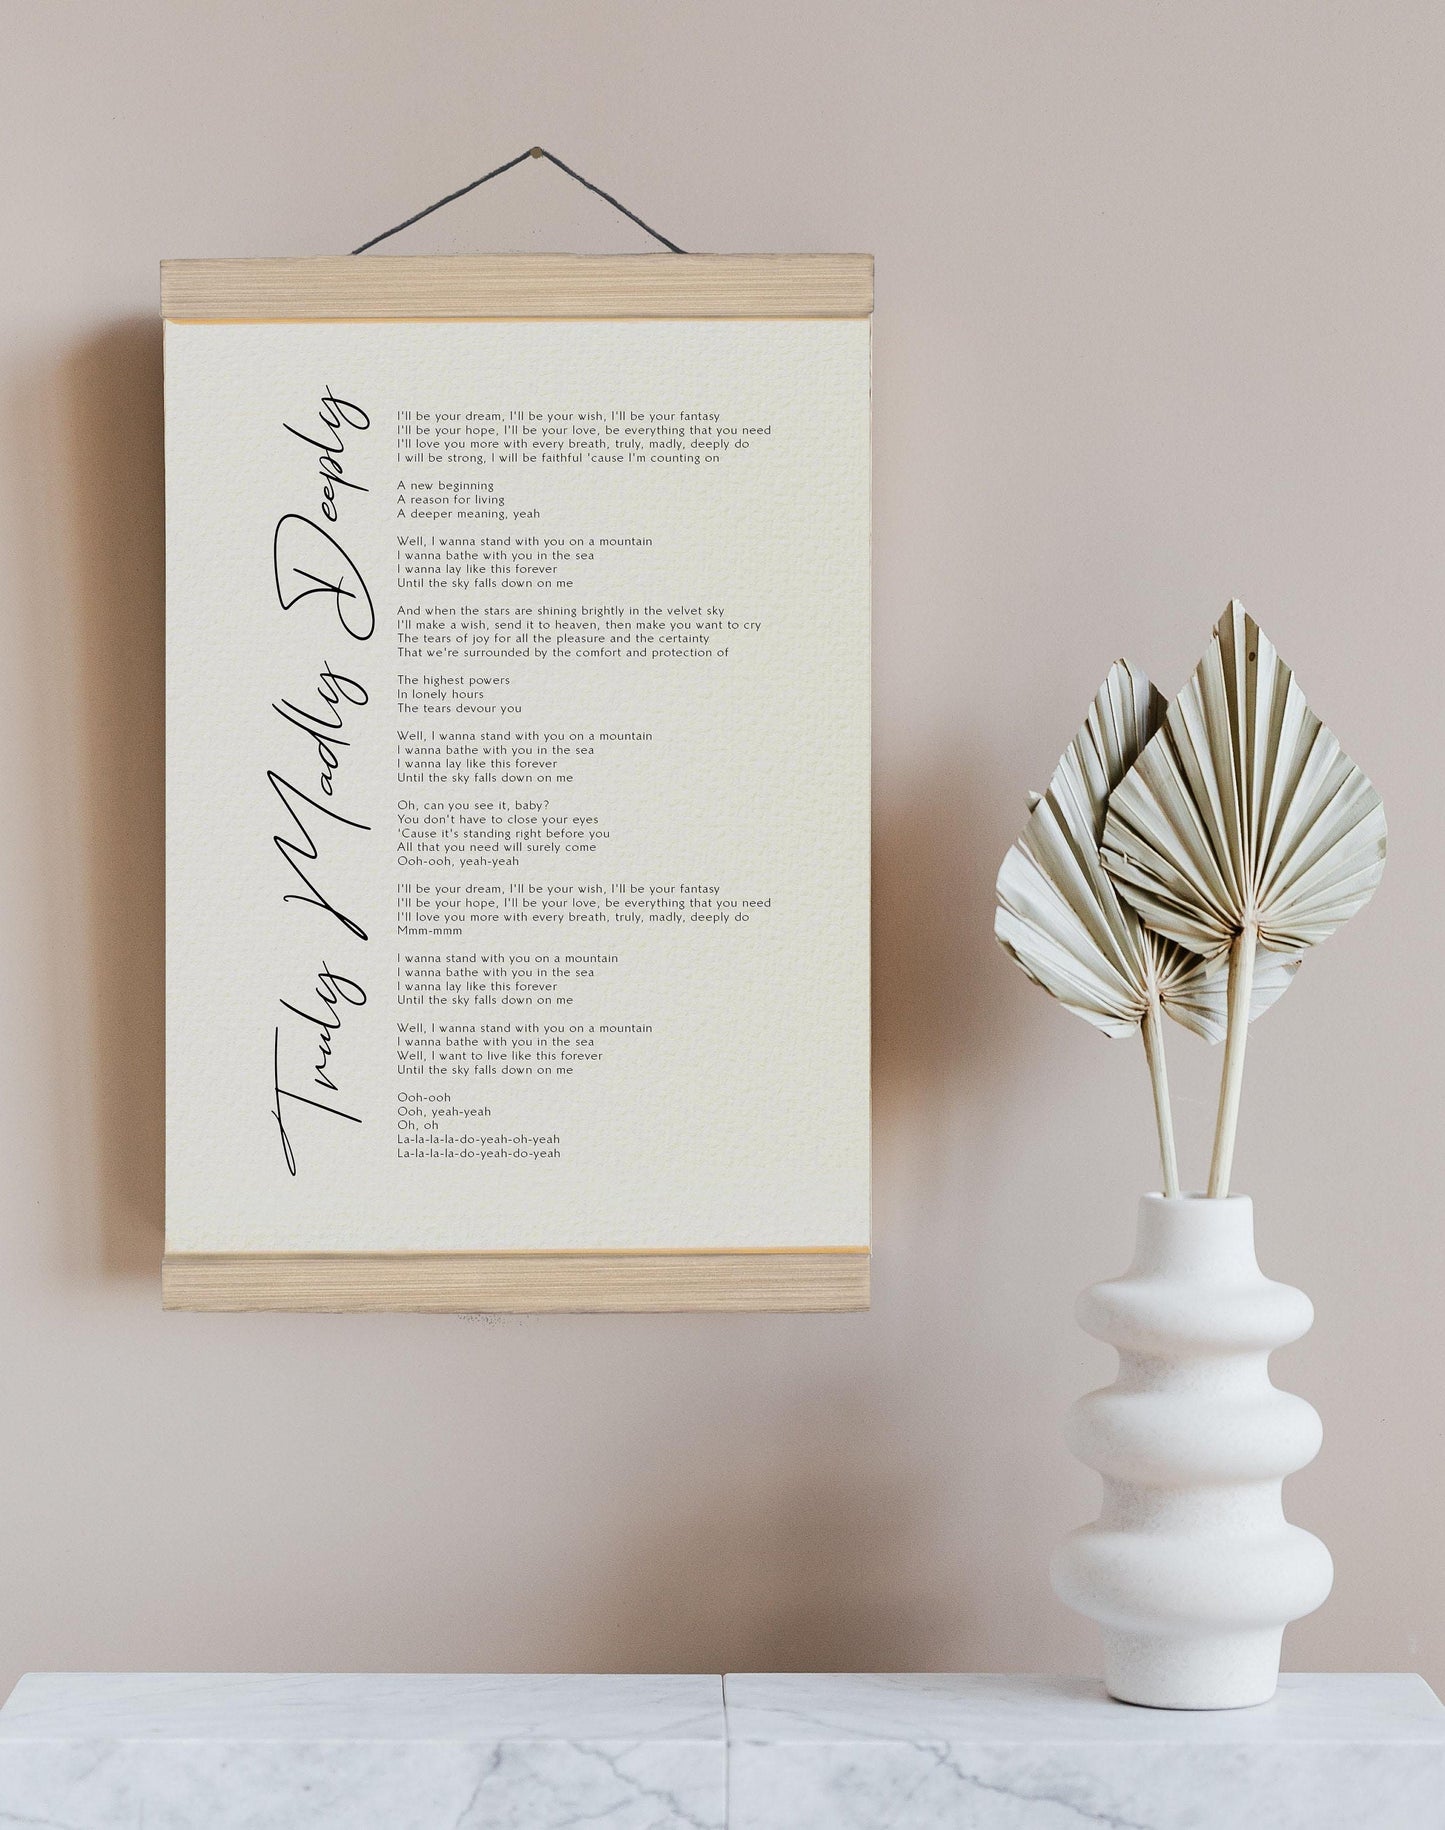 Truly Madly Deeply Song Lyrics Print by Savage Garden, Truly Madly Deeply Song Lyrics Print Framed - Love Song Poster Print Savage Garden